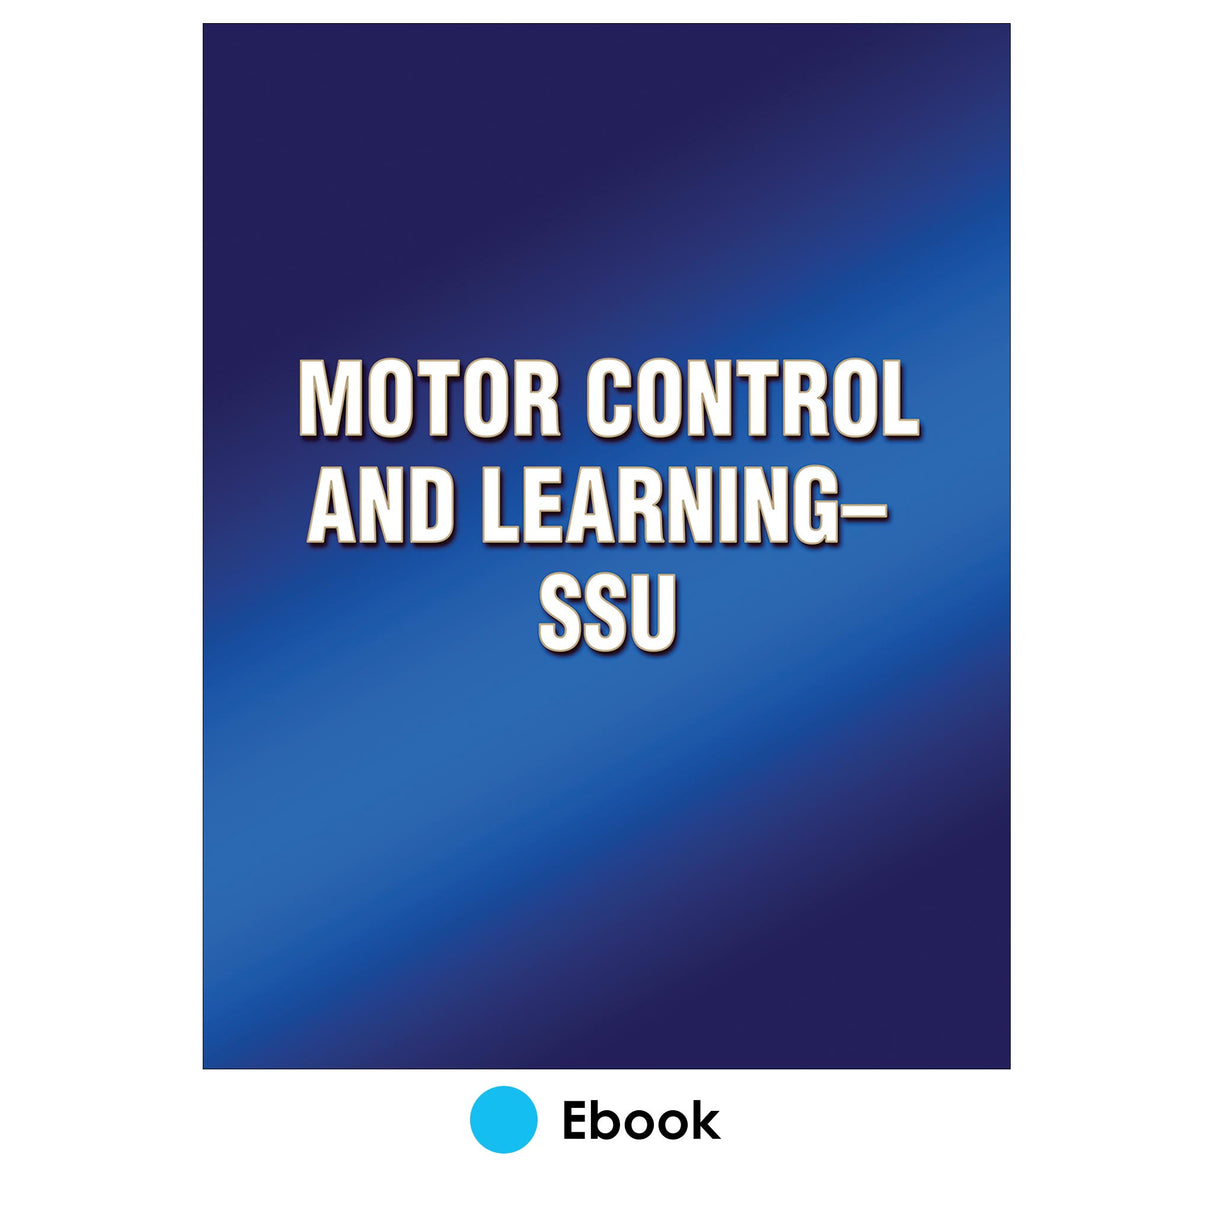 Motor Control and Learning-SSU